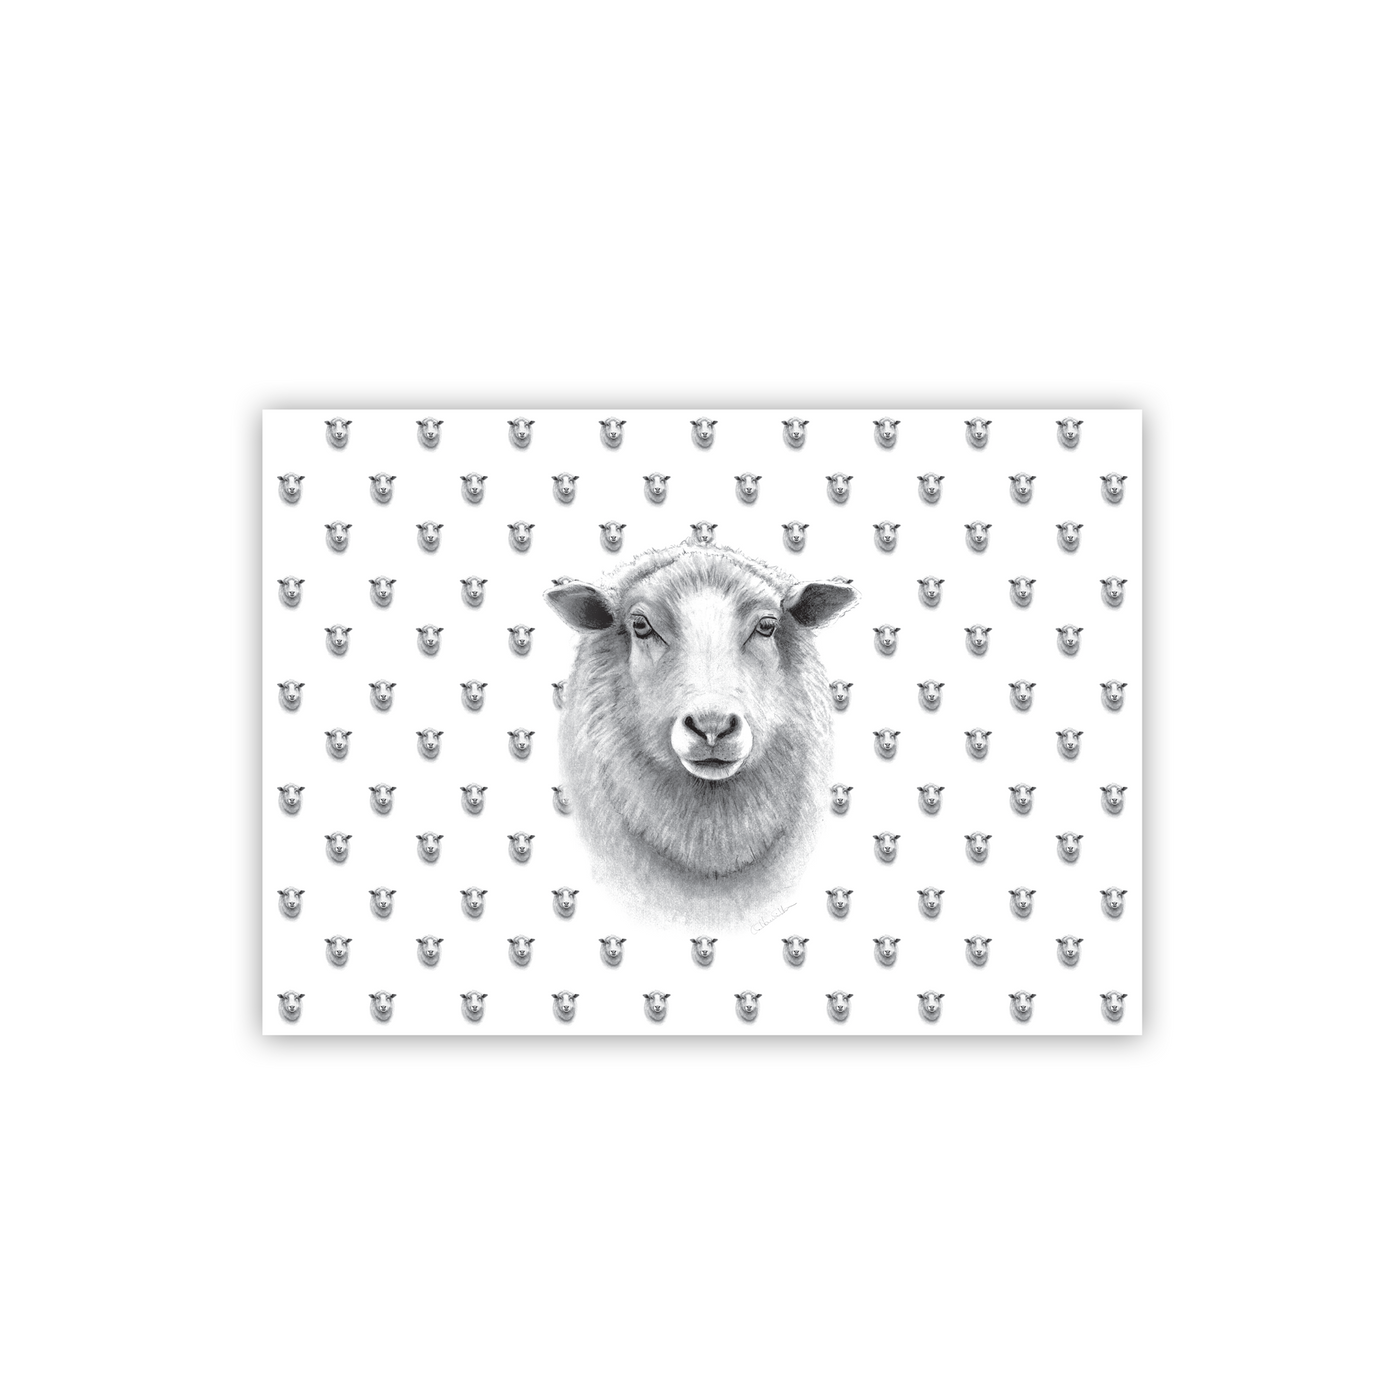 Sheep Placemats - Wholesale